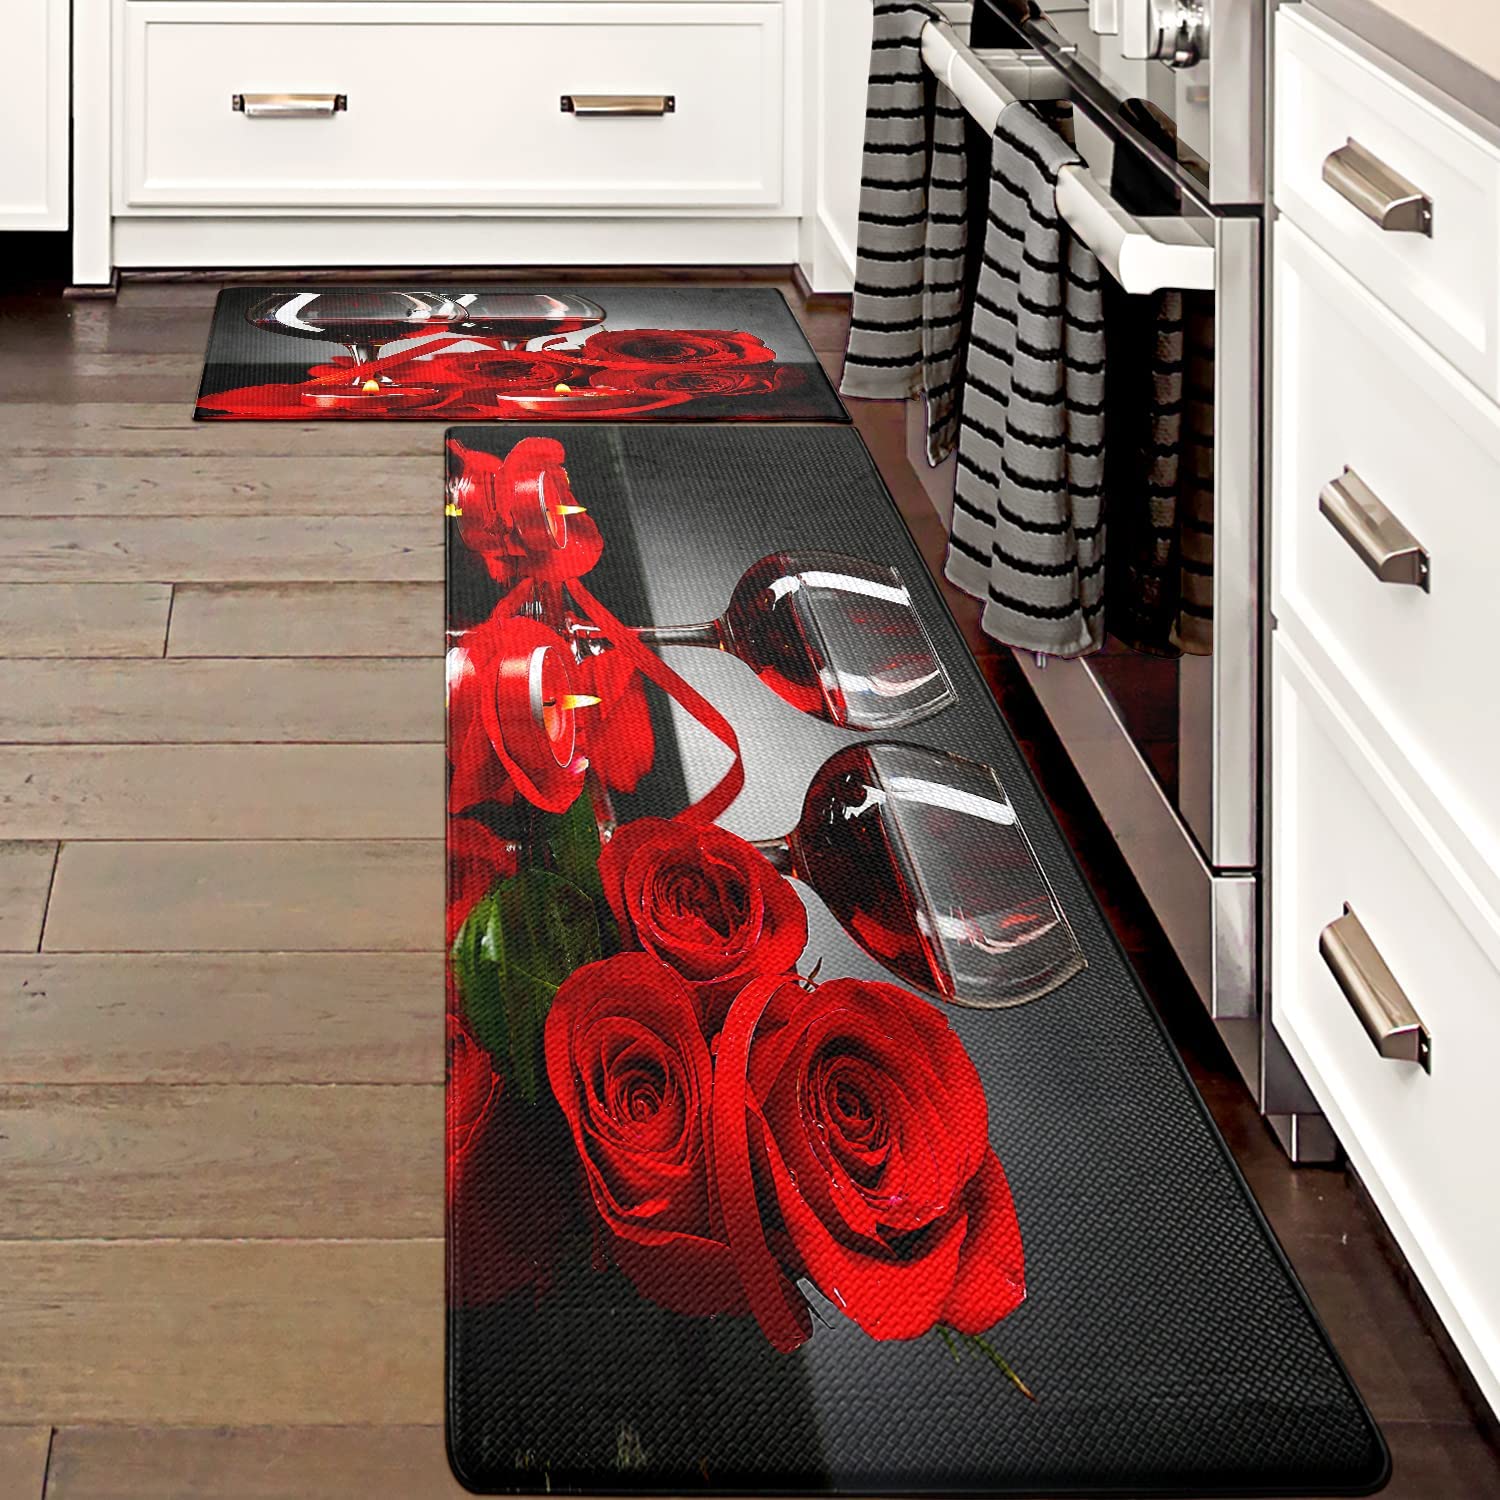 Wine Kitchen Rugs Italian Kitchen Mats for Floor 2 Piece, Anti Fatigue  Floor Mat for Kitchen, Kitchen Floor Mats for in Front of Sink and Kitchen  Matt for Standing for Kitchen Decor